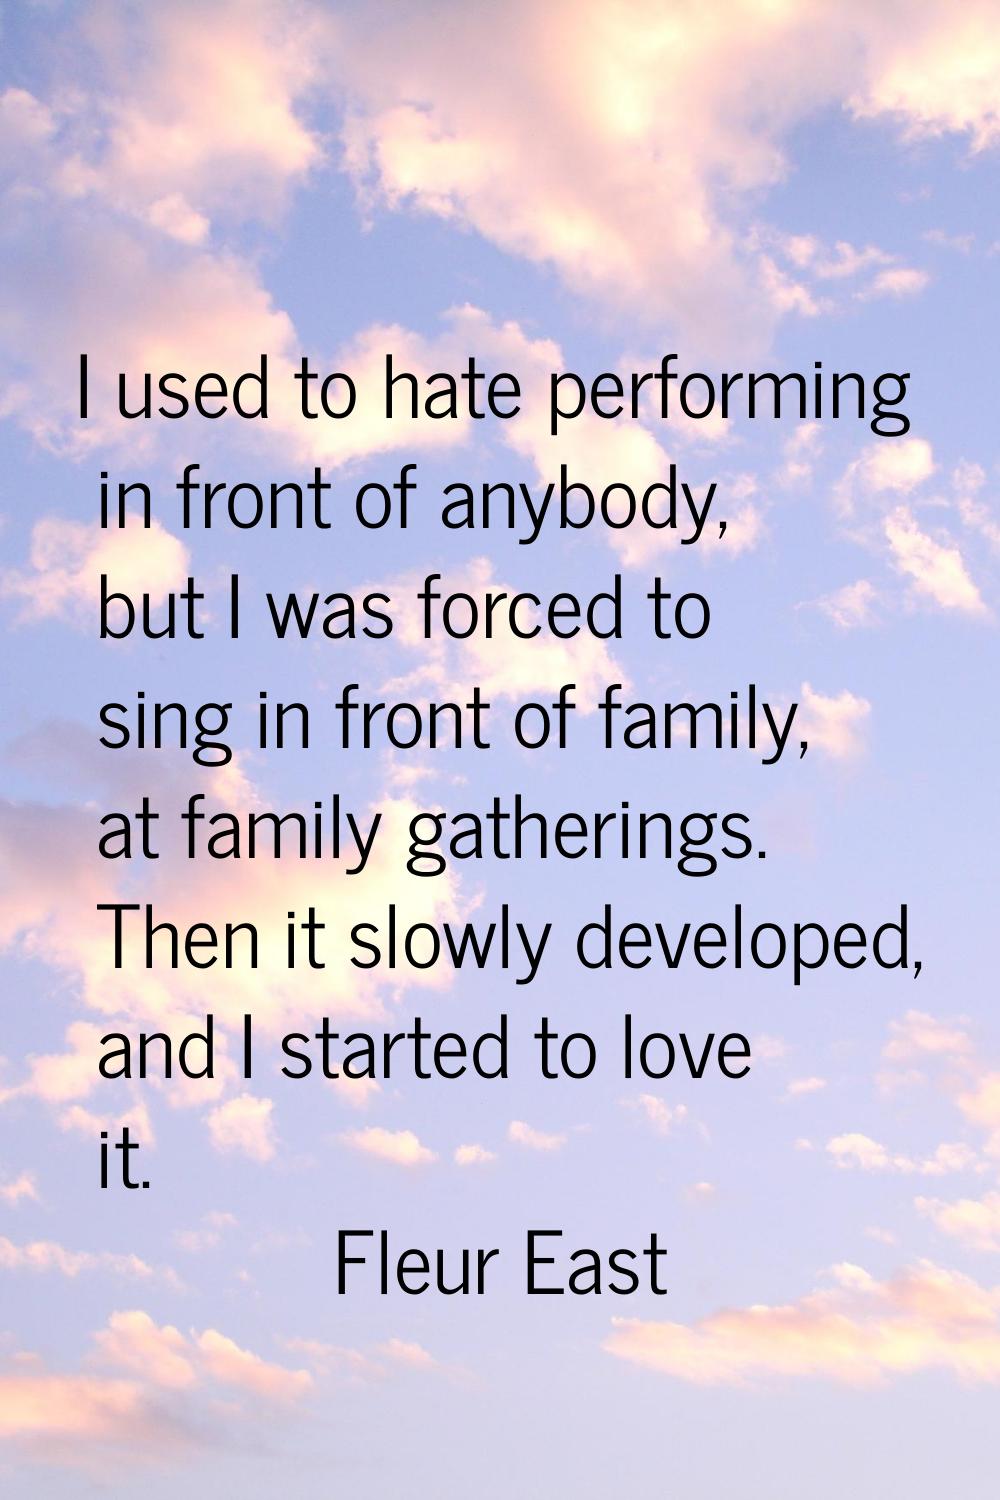 I used to hate performing in front of anybody, but I was forced to sing in front of family, at fami